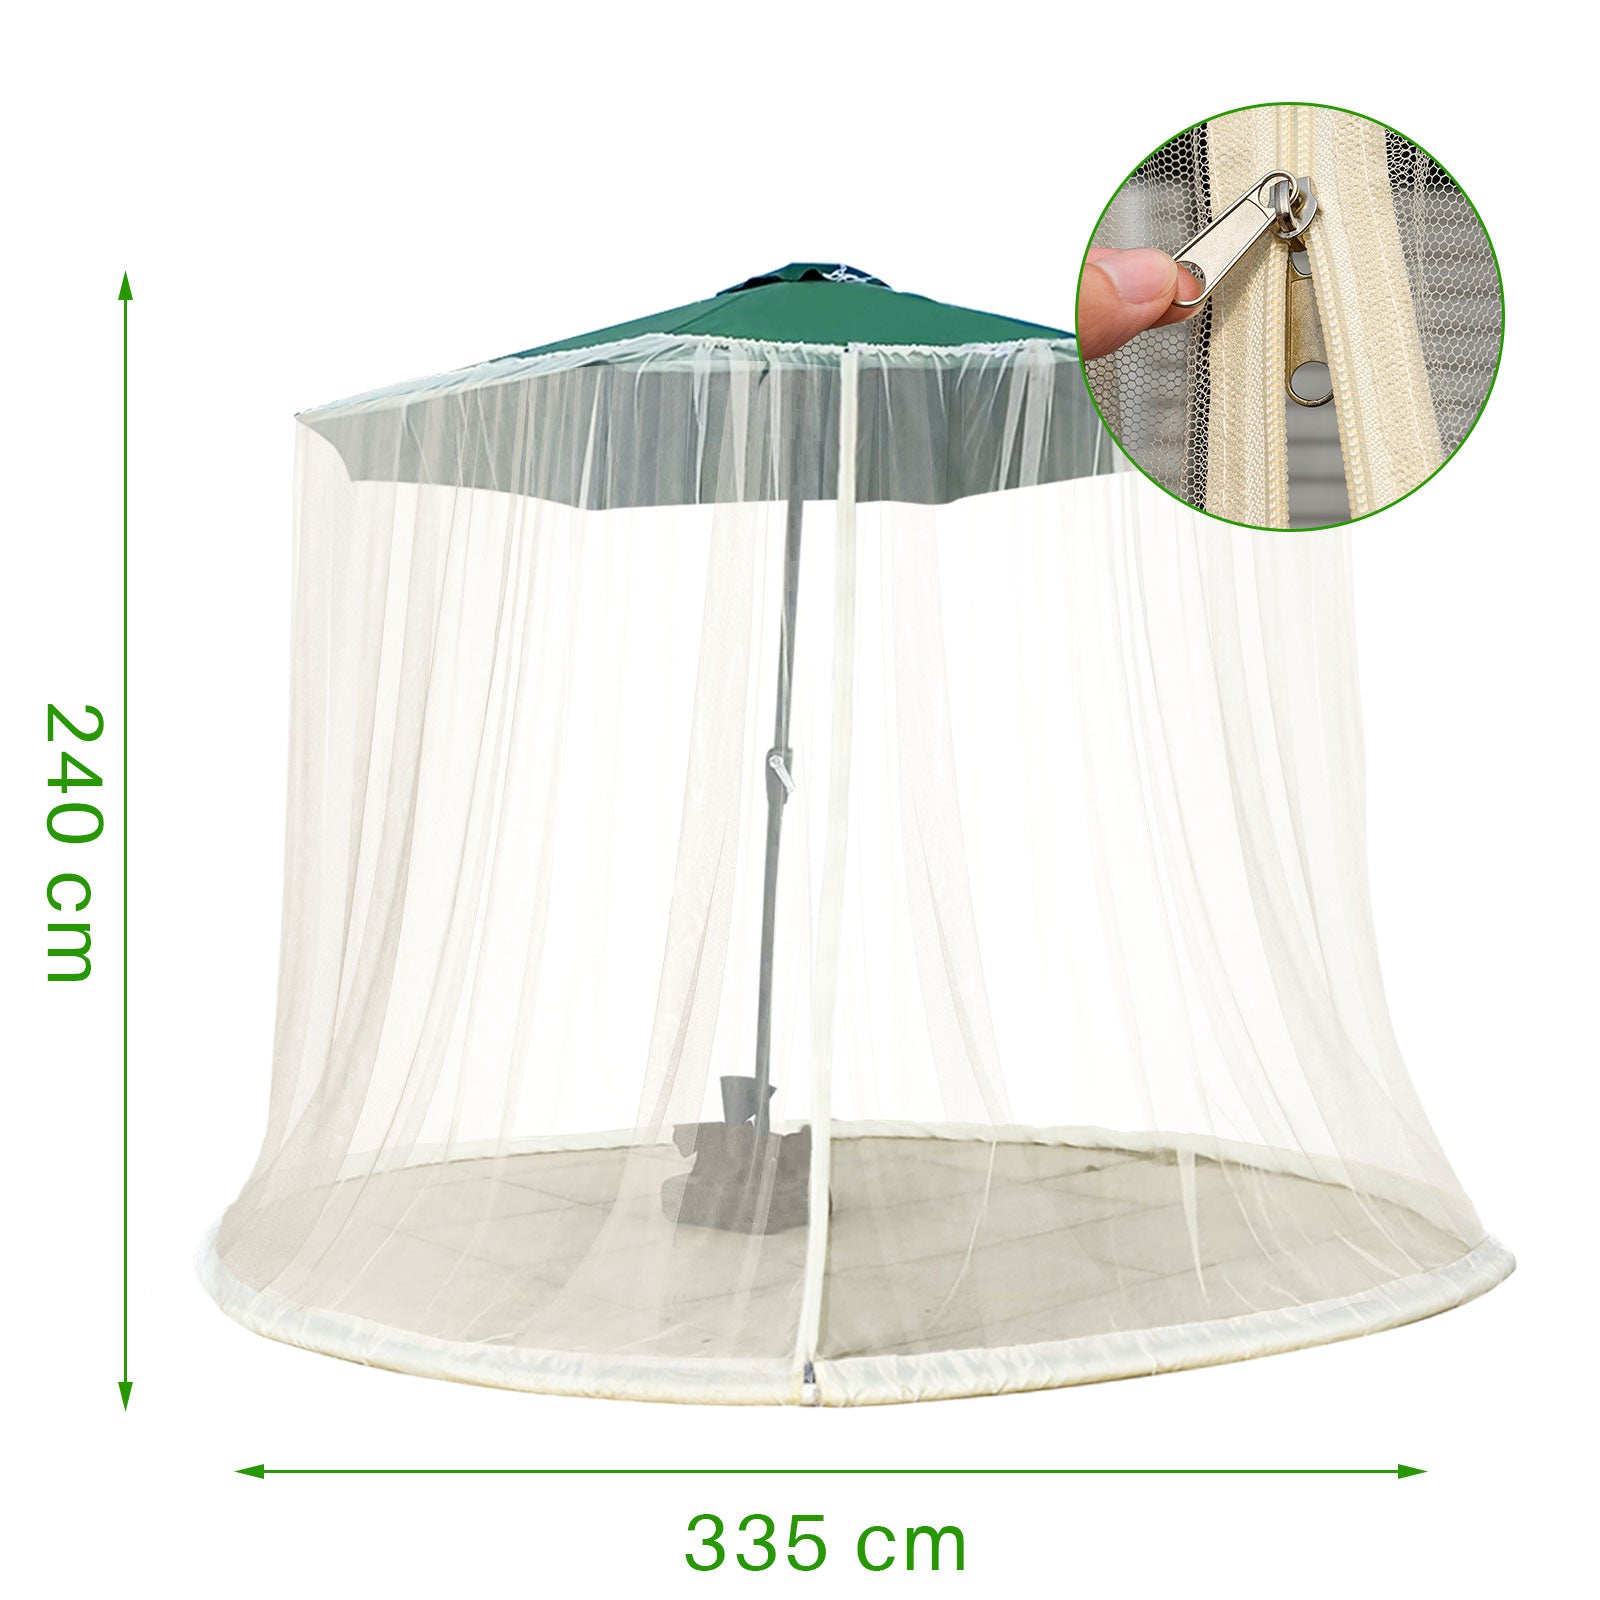 Mosquito Net Cover for Parasol, Insect Parasol Cover for Outdoor, Screen Cover for Yard Umbrella with Zippered Mesh